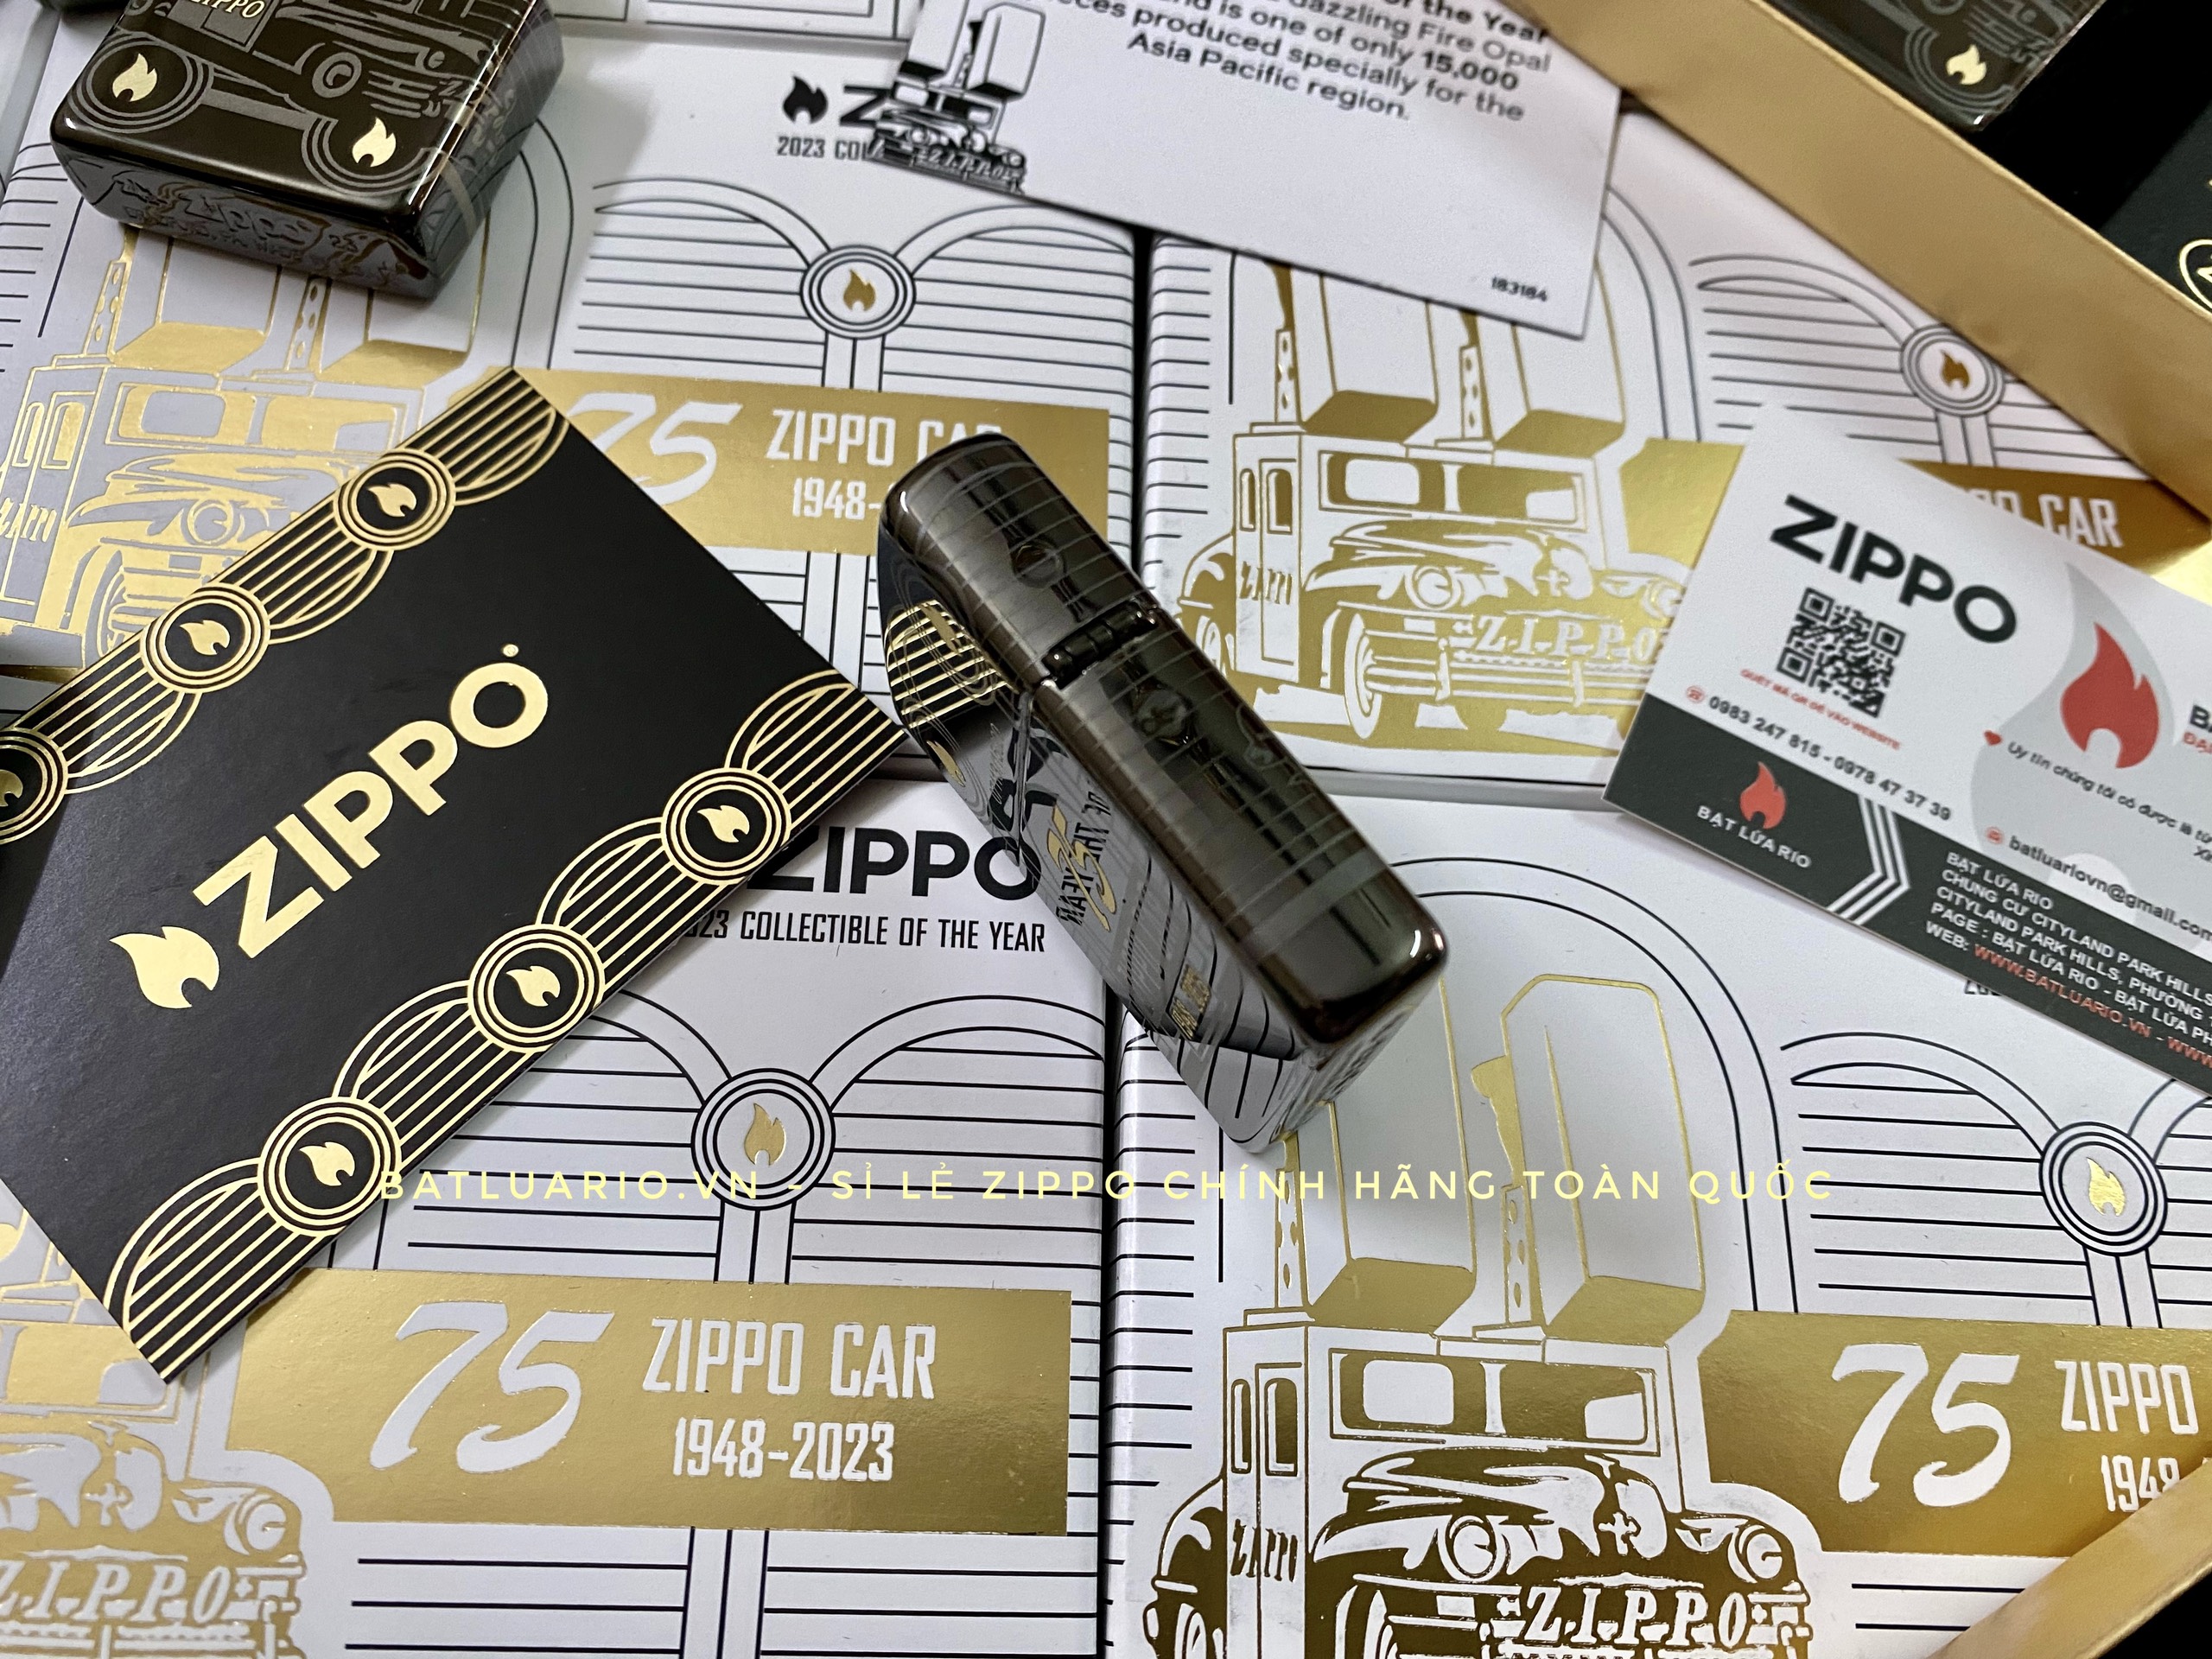 Zippo 48692 - Zippo 2023 Collectible Of The Year - Zippo Car 75th Anniversary Asia Pacific Limited Edition - Zippo COTY 2023 - Honoring 75 Years Of The Zippo Car 62